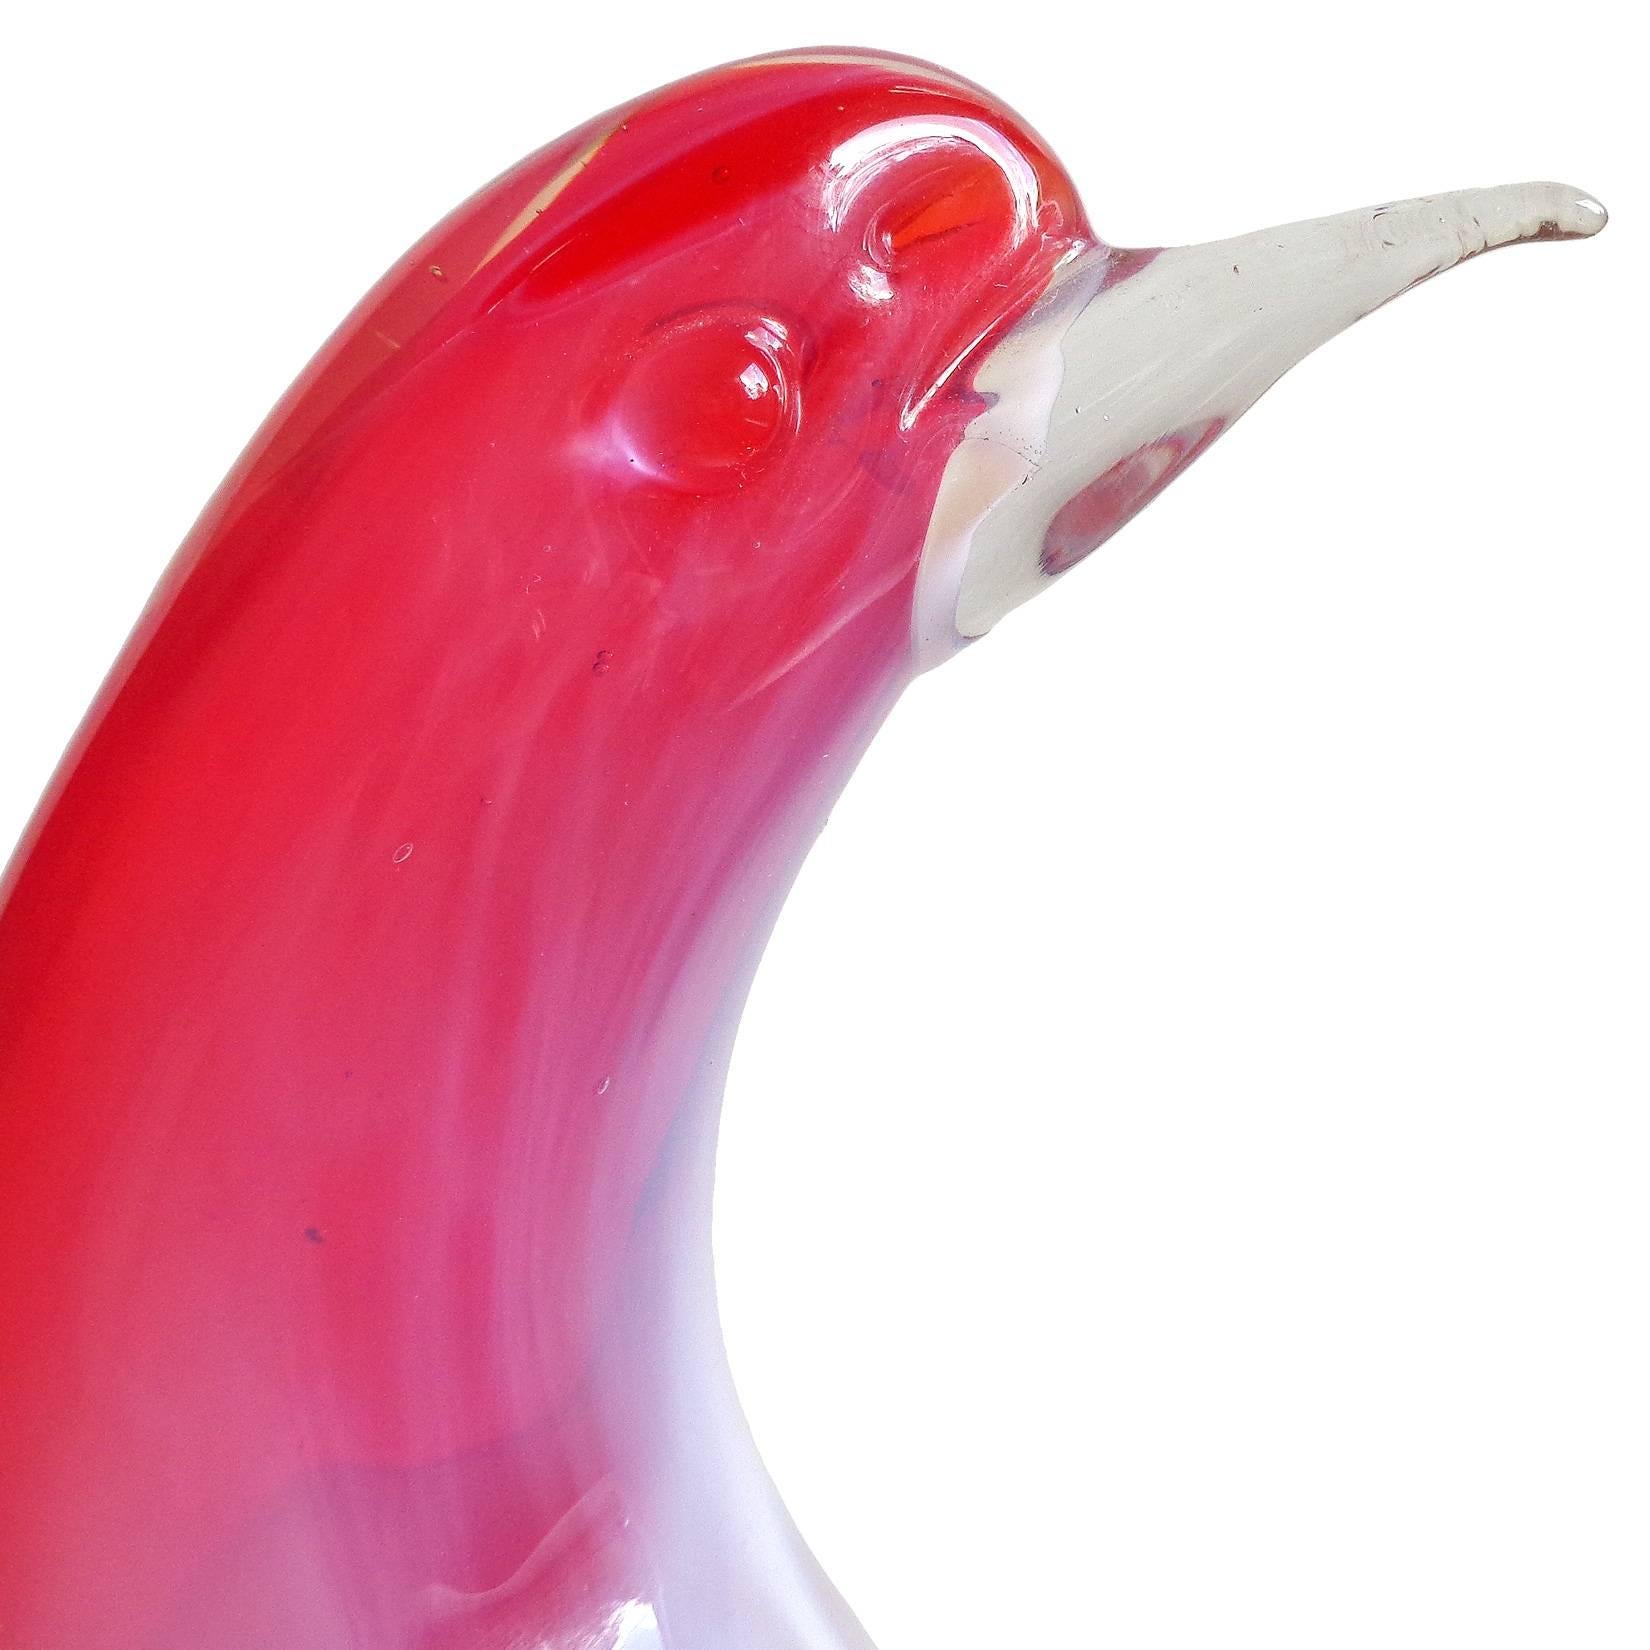 Gorgeous Murano hand blown red and white opalescent Italian art glass bird sculpture. The piece is designed by, and signed Berto Toso, 1966. It measures 10 3/4